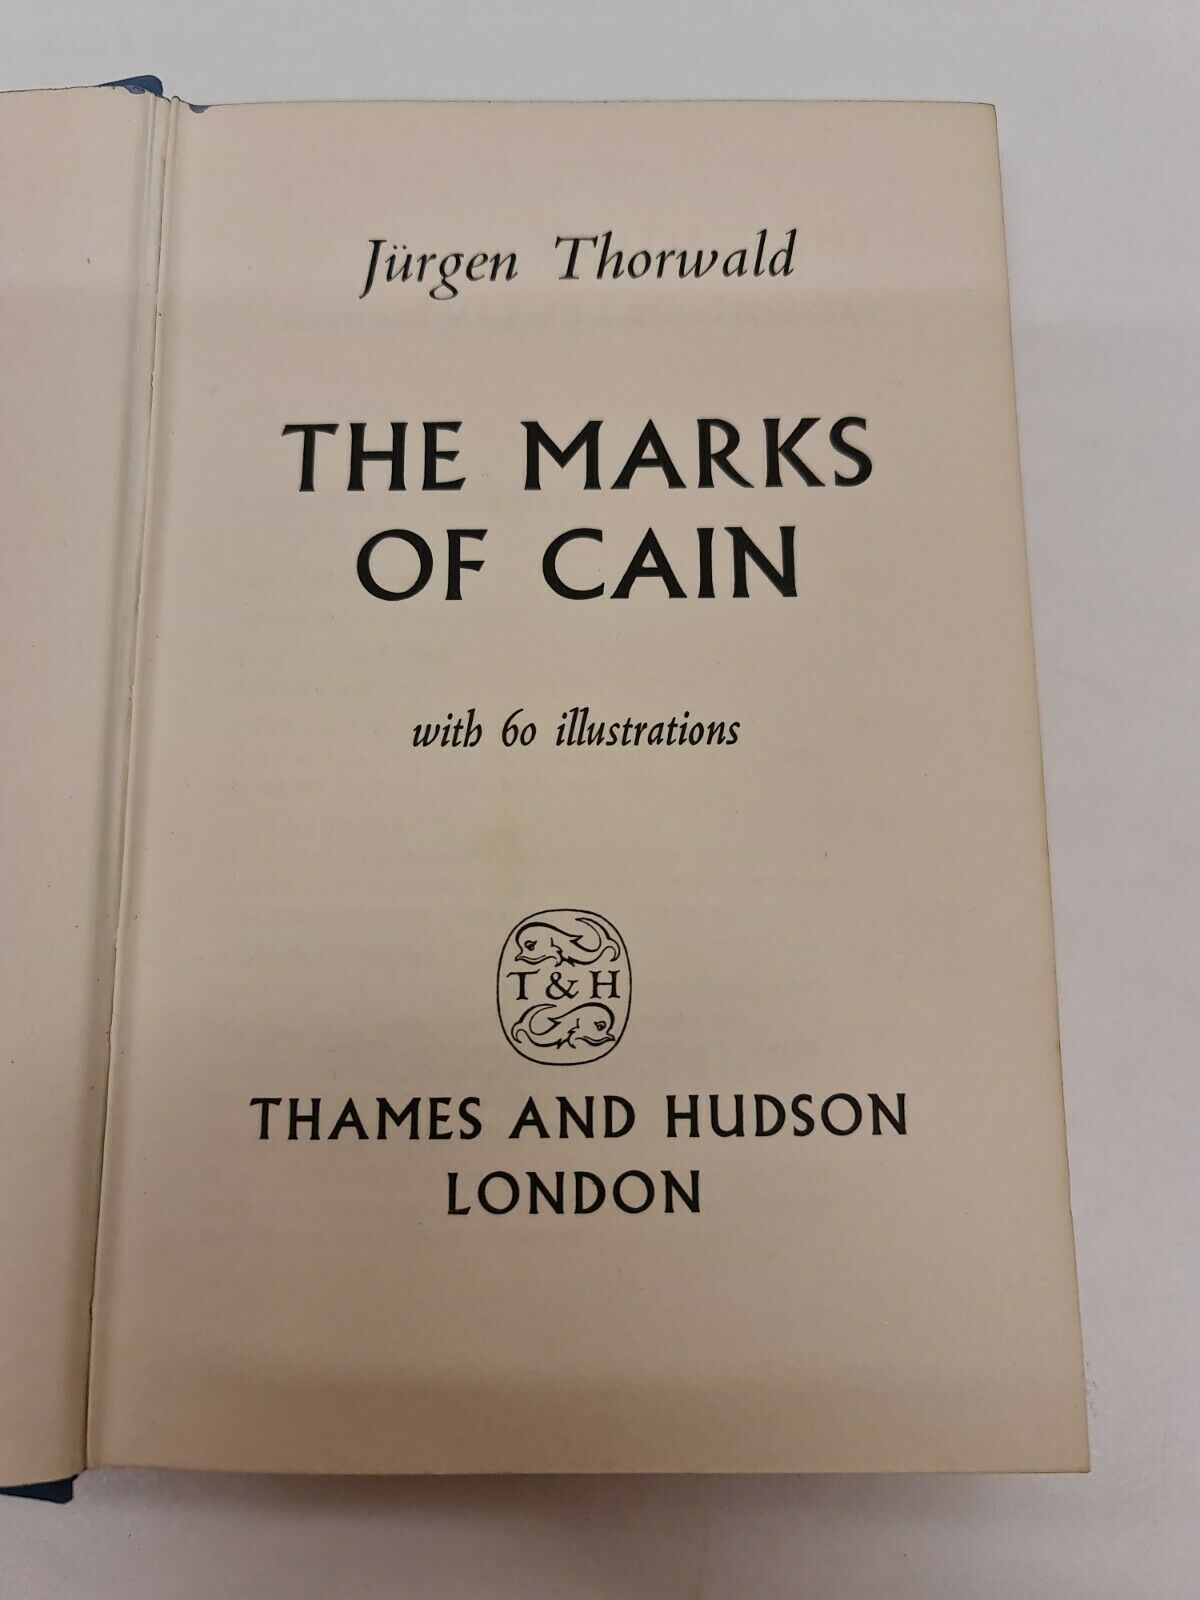 The Marks of Cain by Jurgen Thorwald